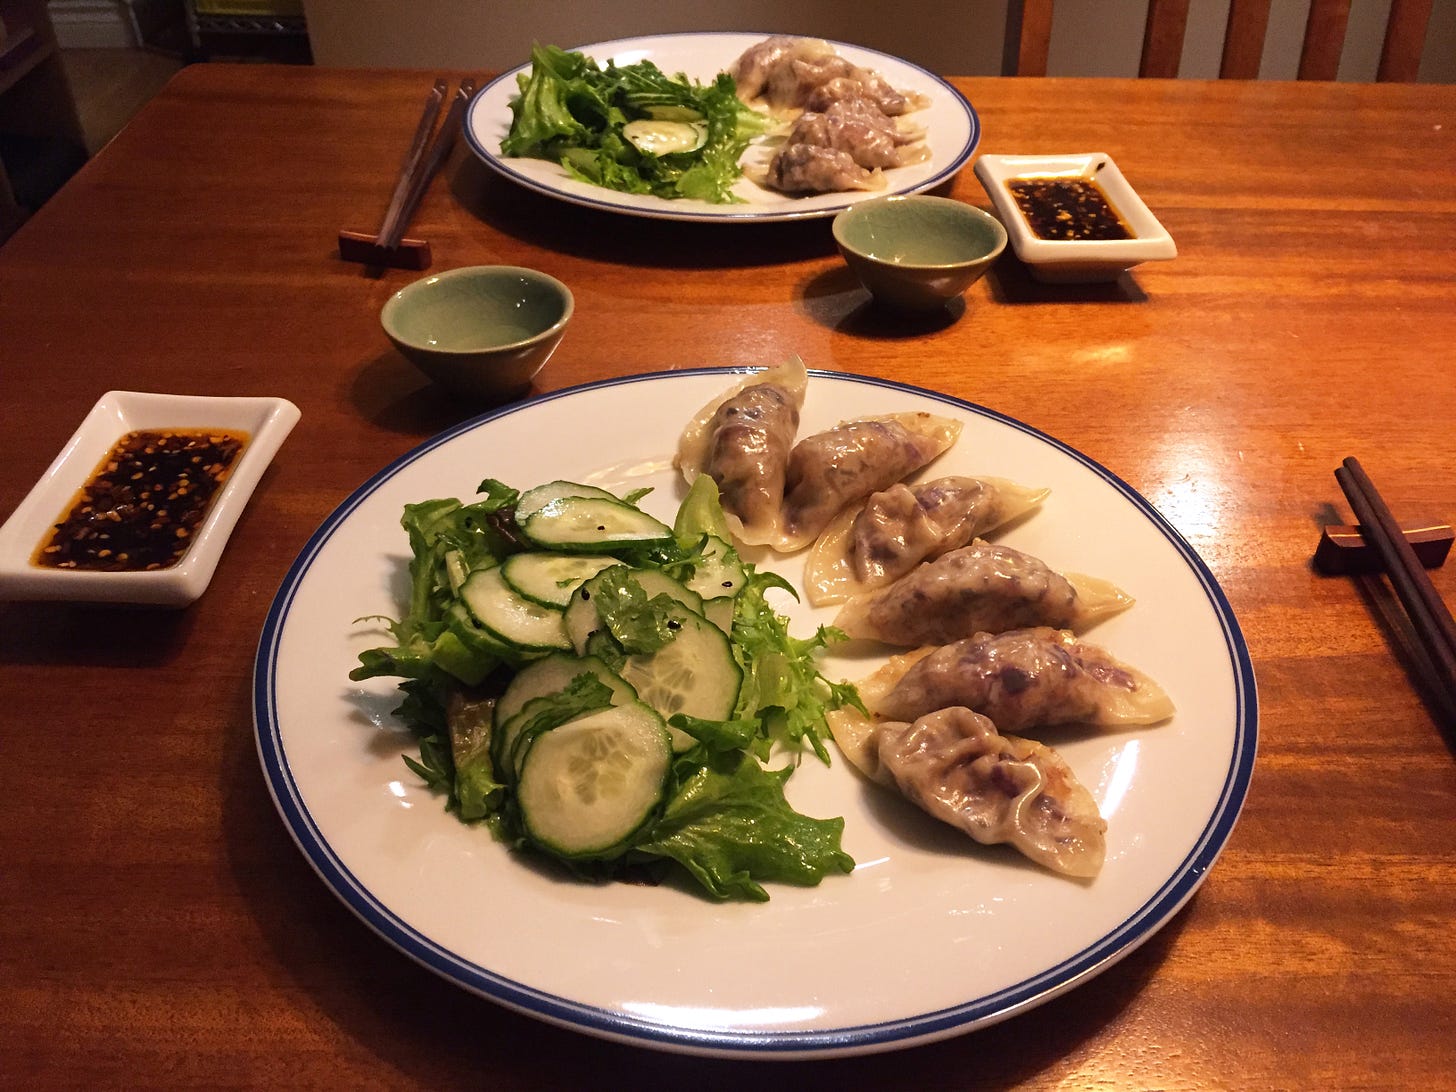 Two plates with rows of 6 dumplings and a pile of cucumber and endive salad with black sesame seeds. Next to the plates are chopsticks, small cups of rice wine, and flat dishes of sauce with chili flakes visible.